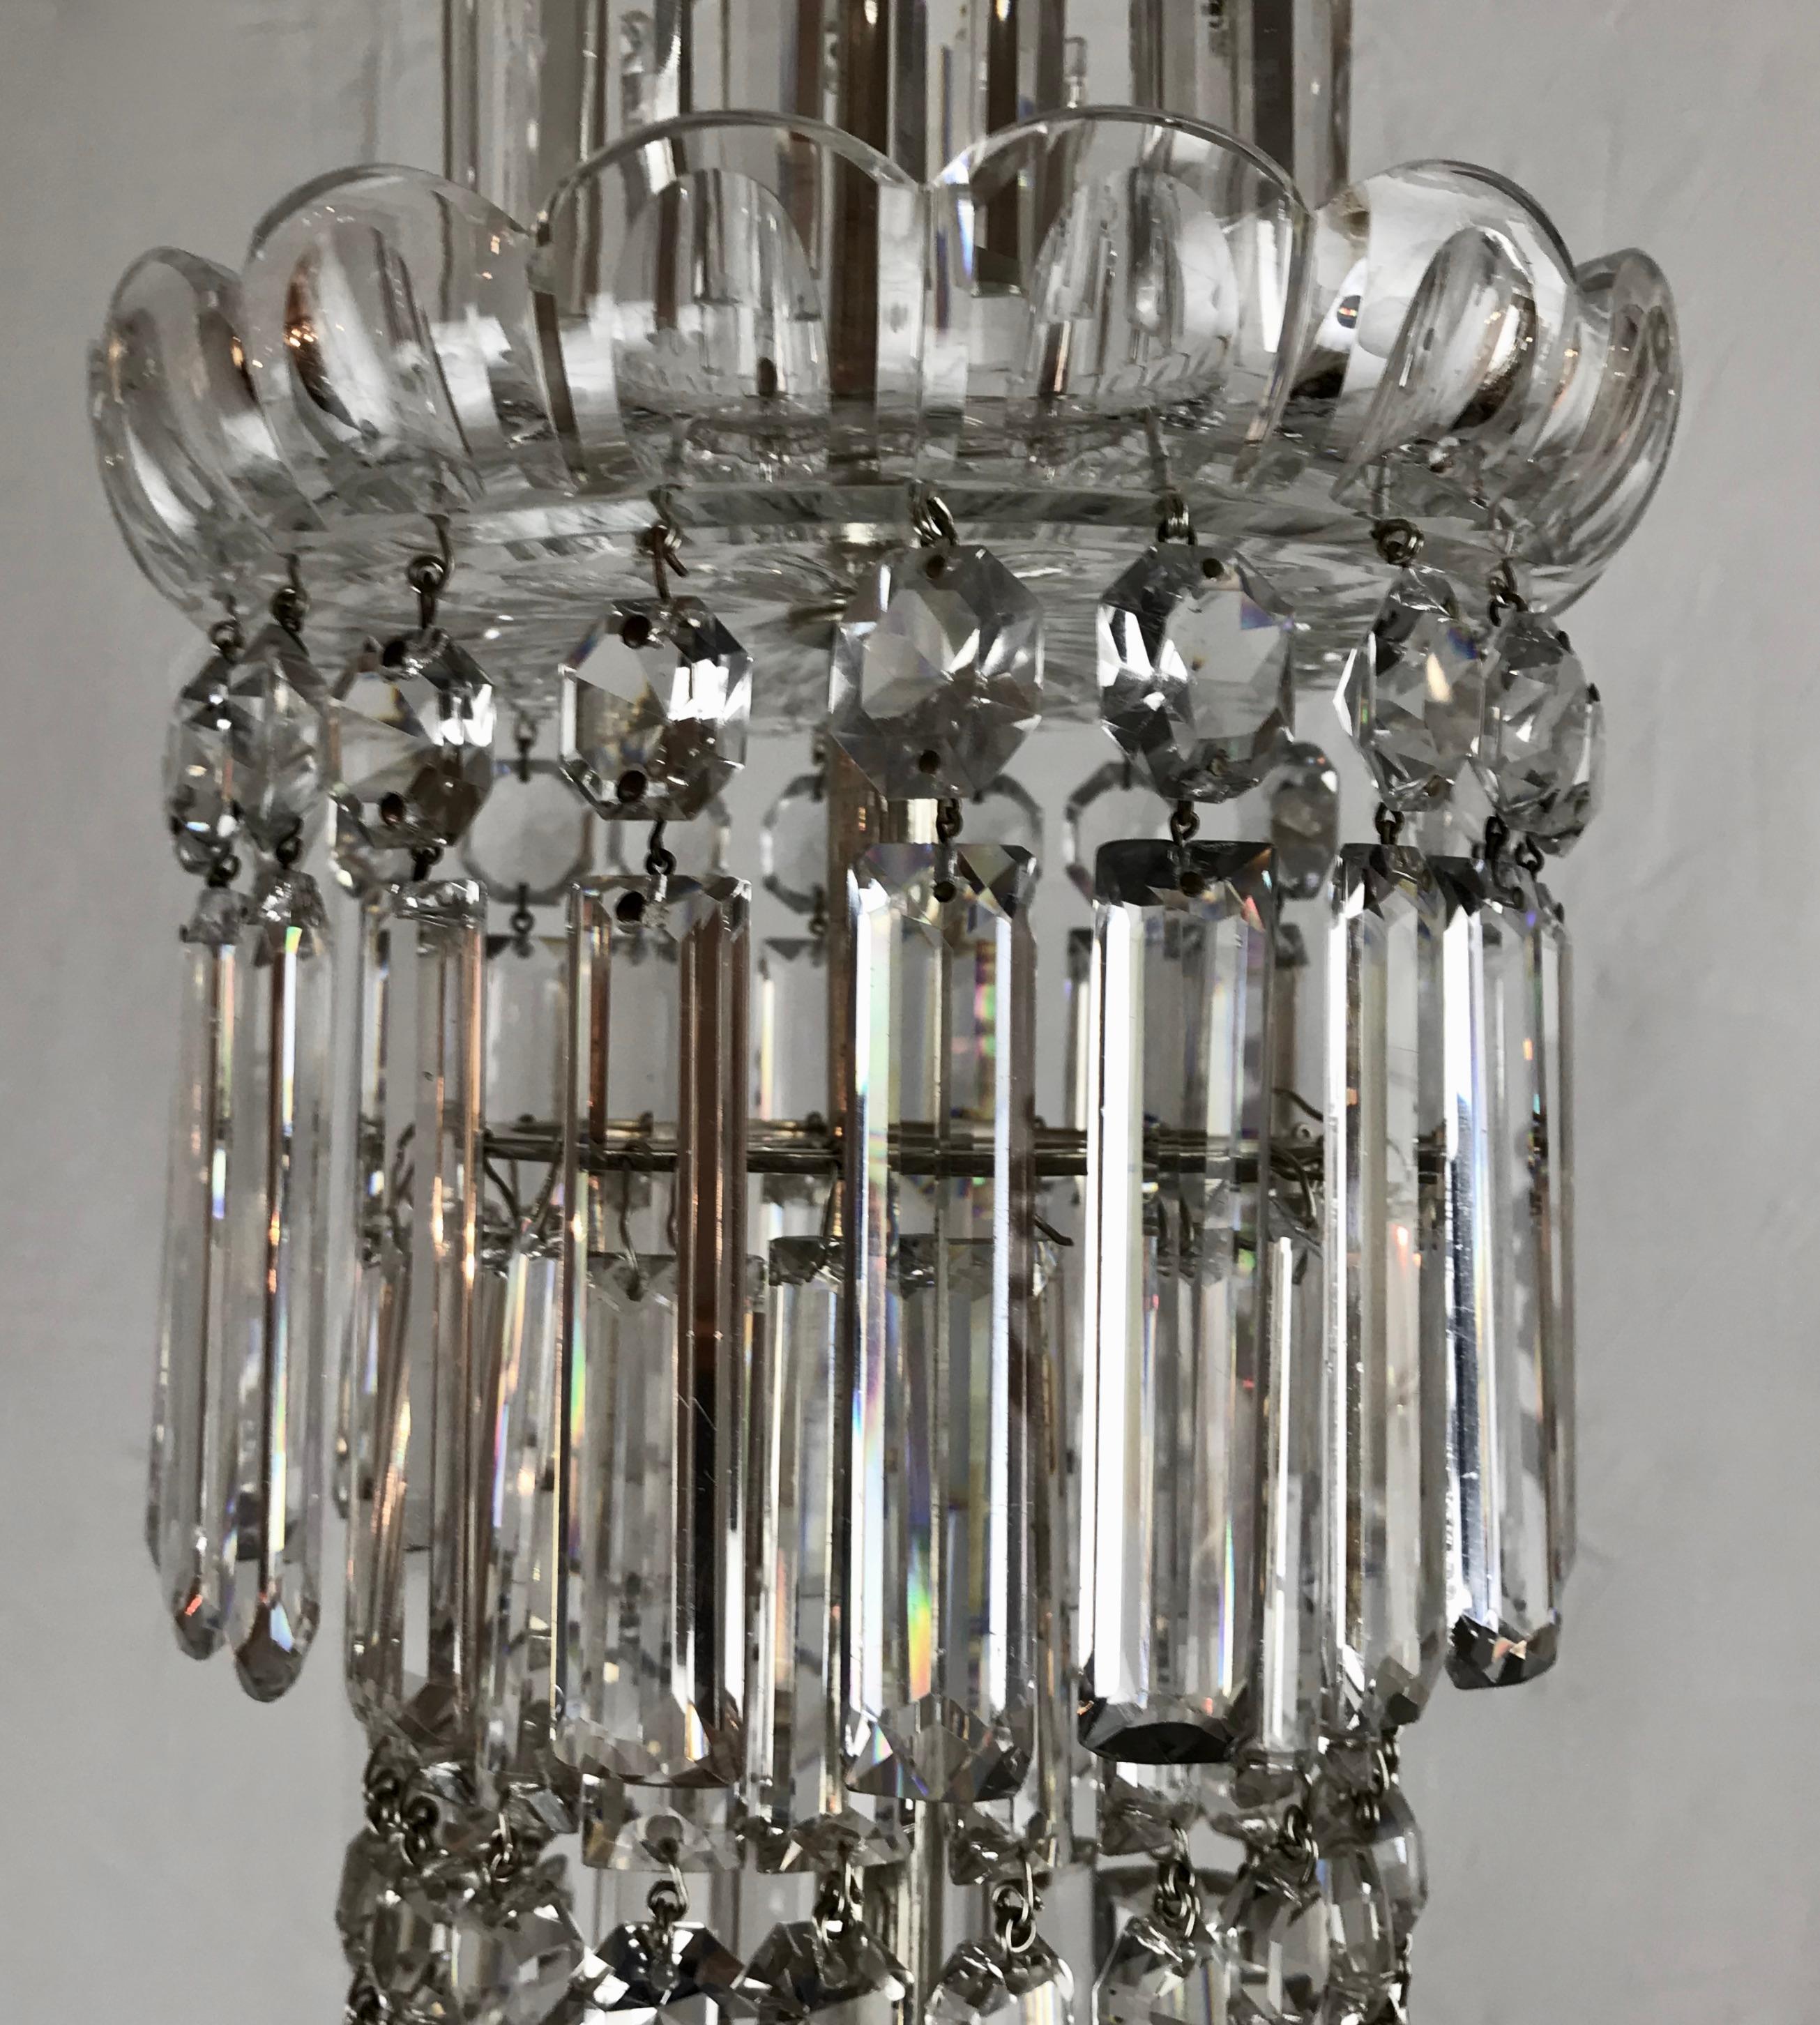  Mid 19th Century Crystal Chandelier by F&C Osler of Tent and Waterfall Design For Sale 3